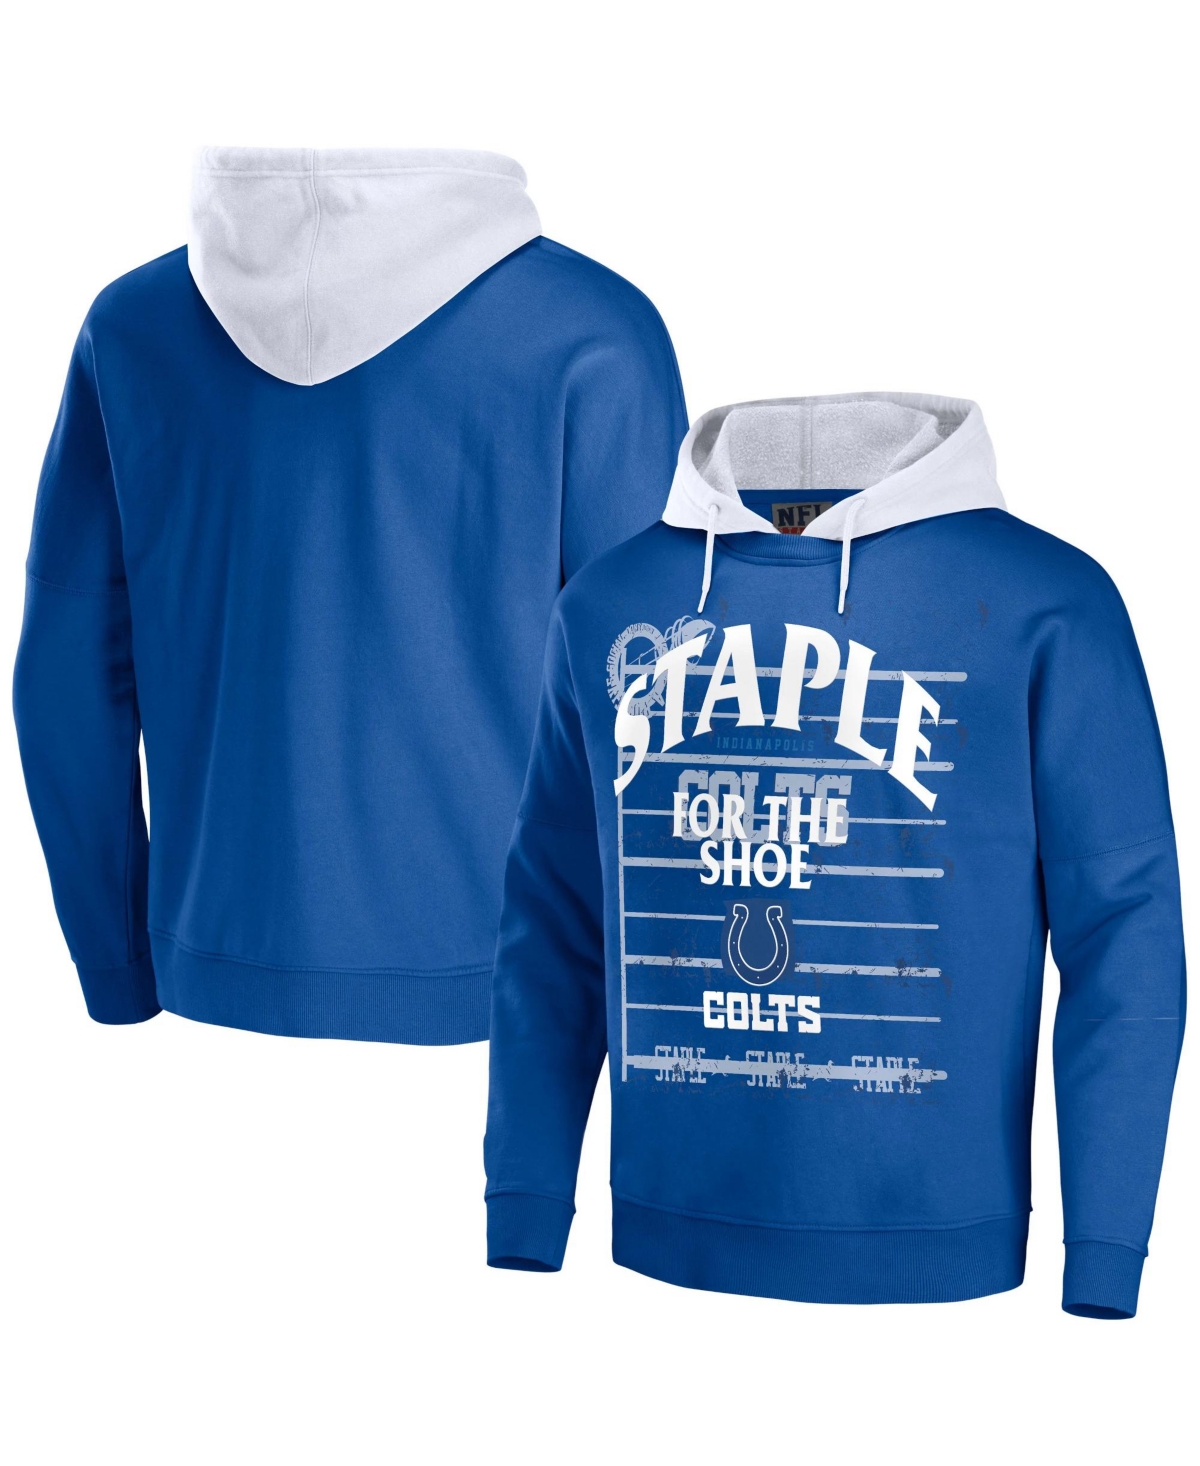 Nfl Properties Men's Nfl X Staple Blue Indianapolis Colts Oversized Gridiron Vintage-like Wash Pullover Hoodie